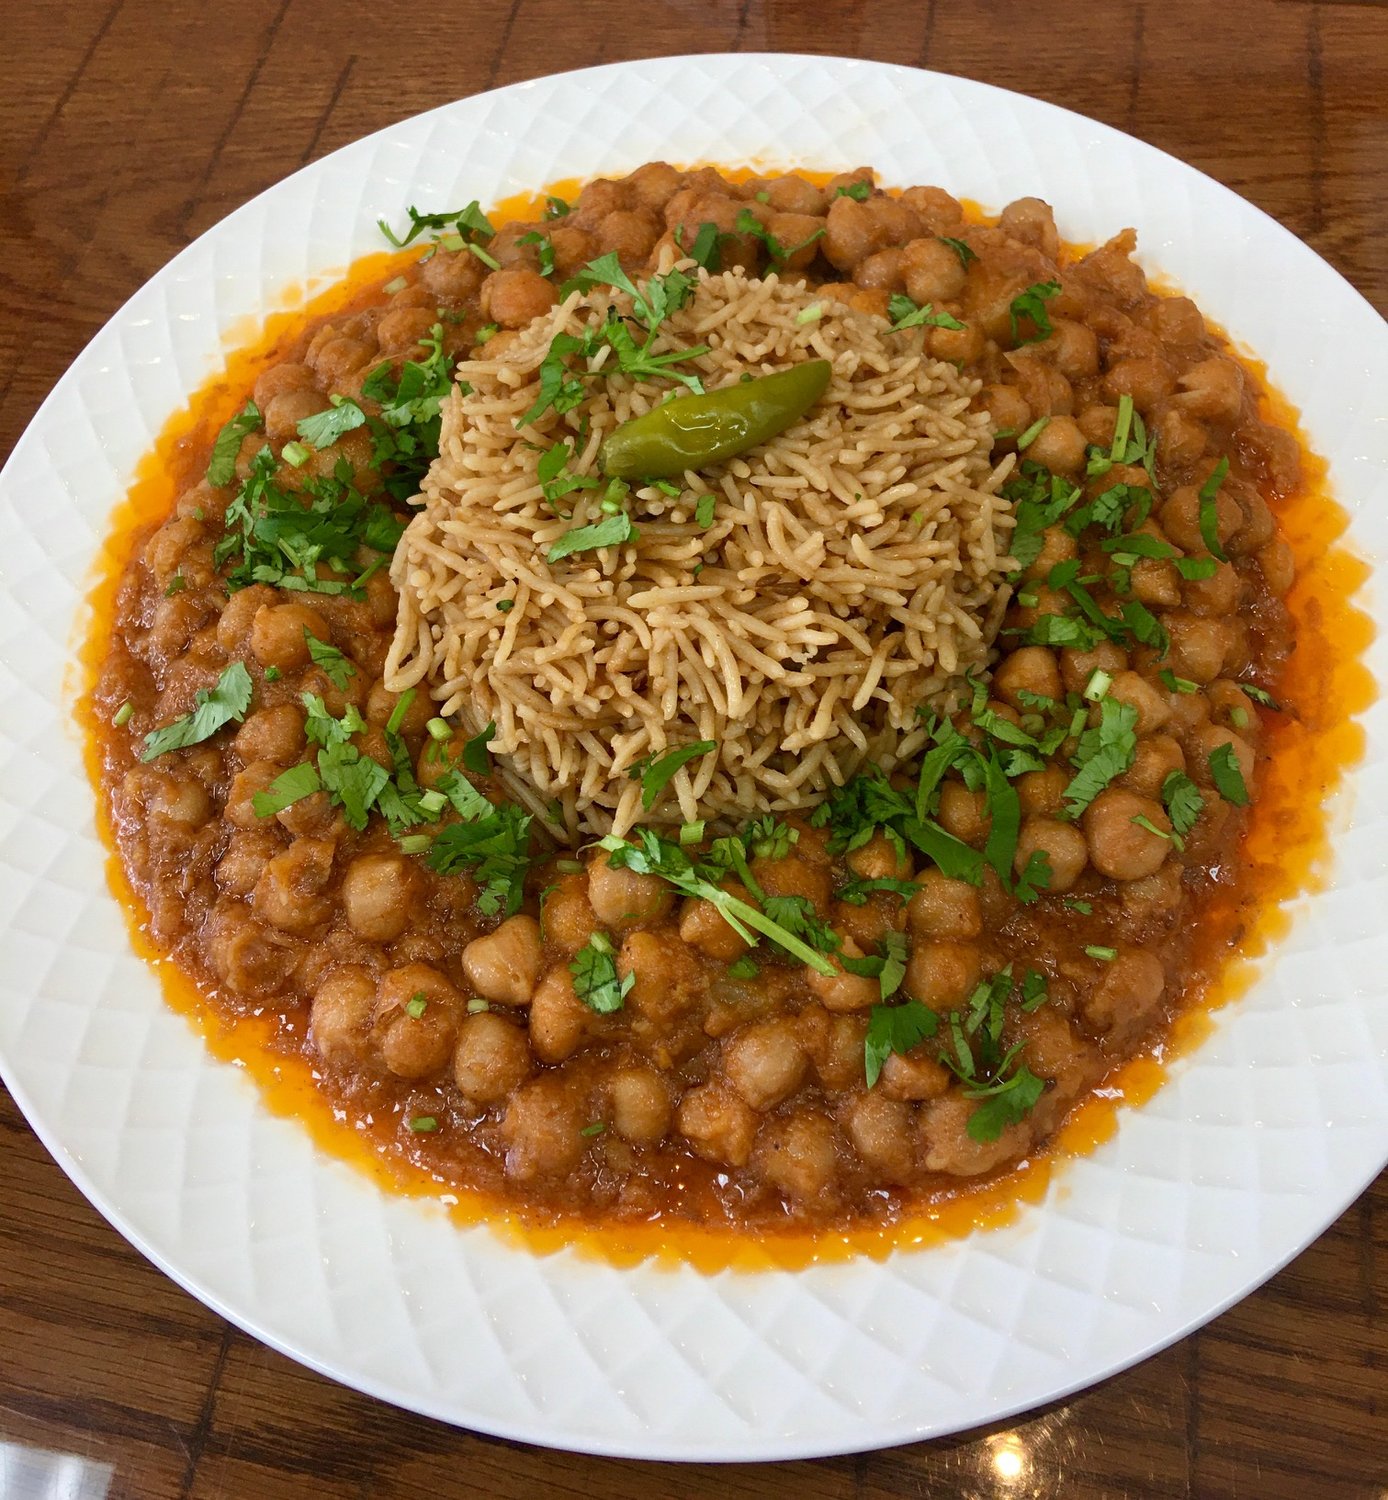 Afghan Kabob’s chickpeas in a special tomato sauce with Afghan rice makes for a satisfying meal.